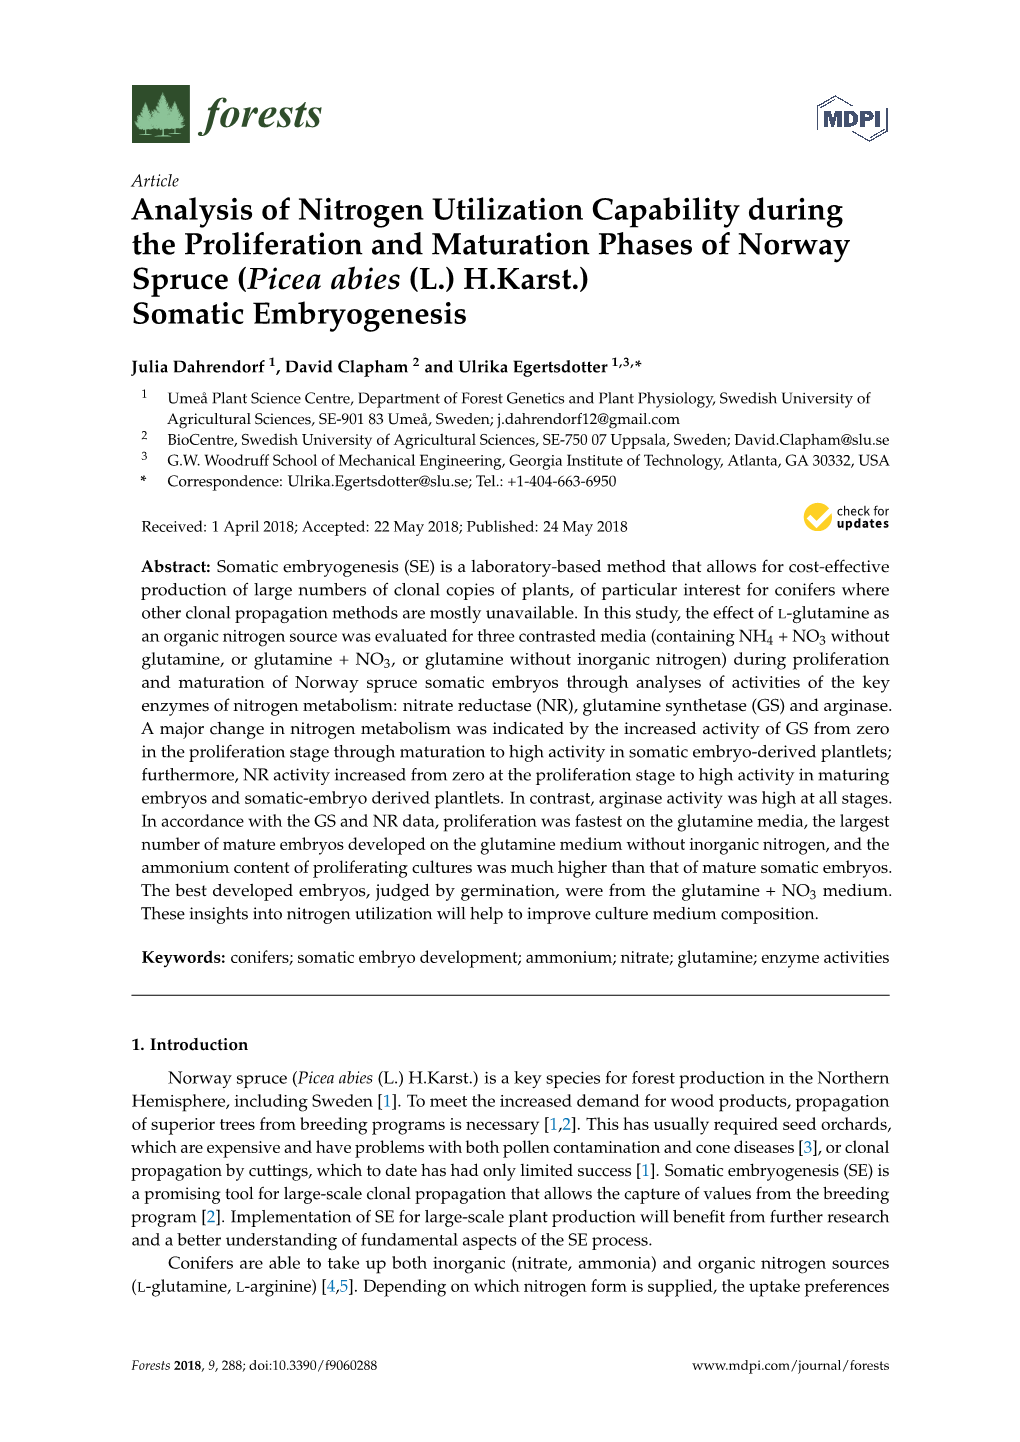 Analysis of Nitrogen Utilization Capability During the Proliferation and Maturation Phases of Norway Spruce (Picea Abies (L.) H.Karst.) Somatic Embryogenesis